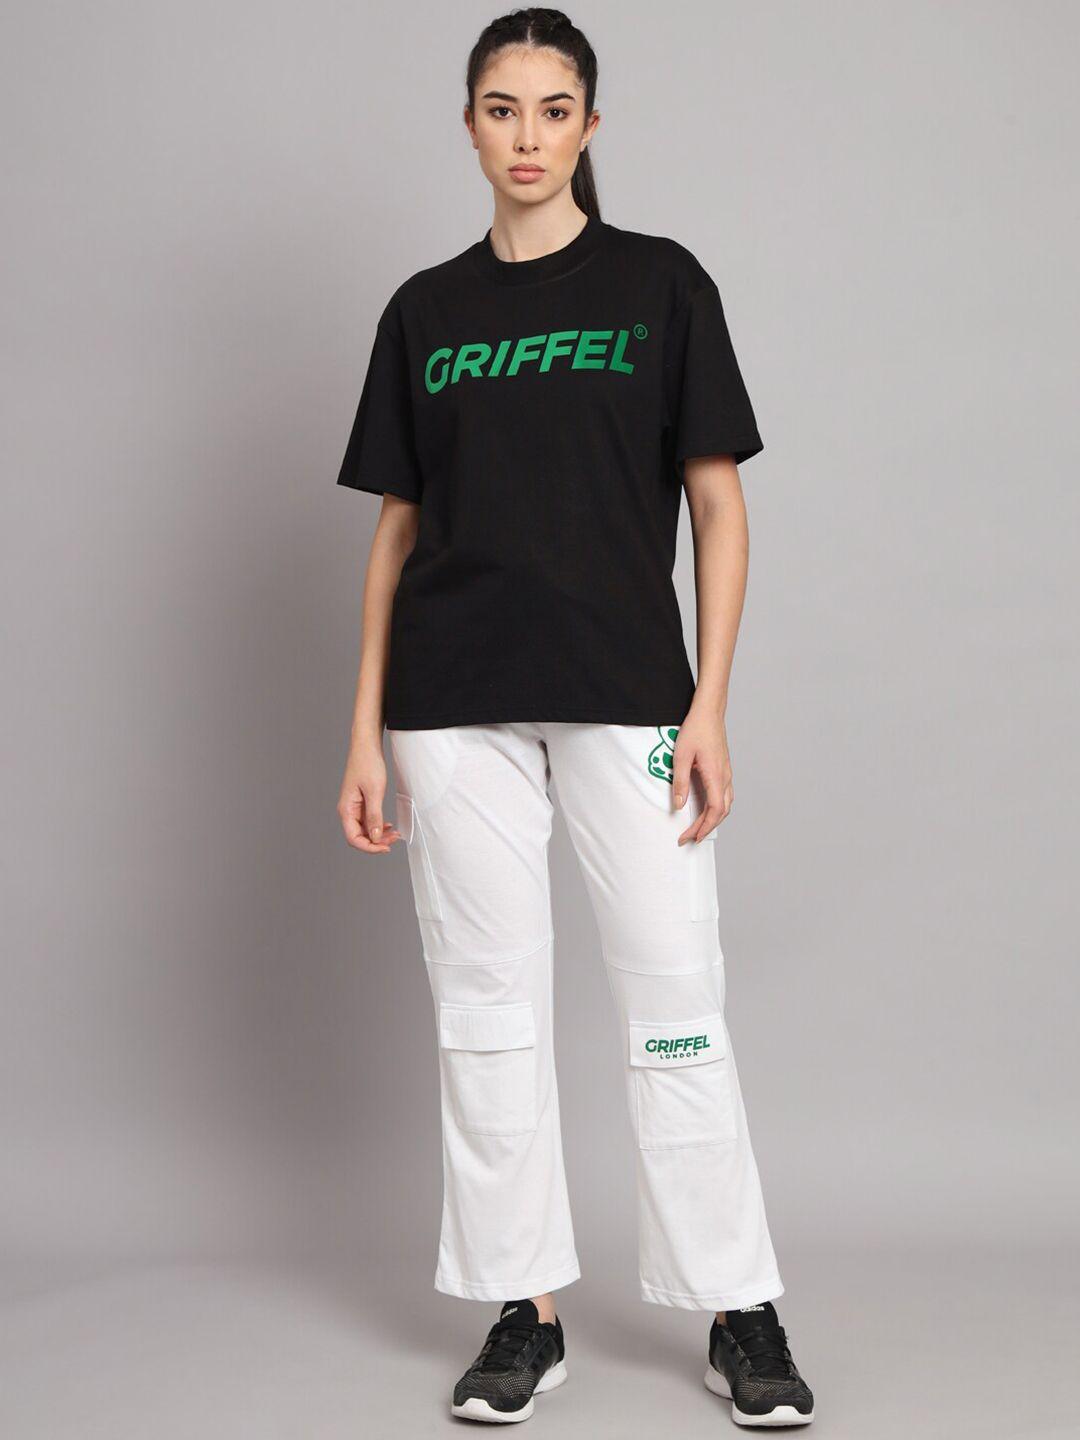 griffel printed cotton t-shirt with track pants